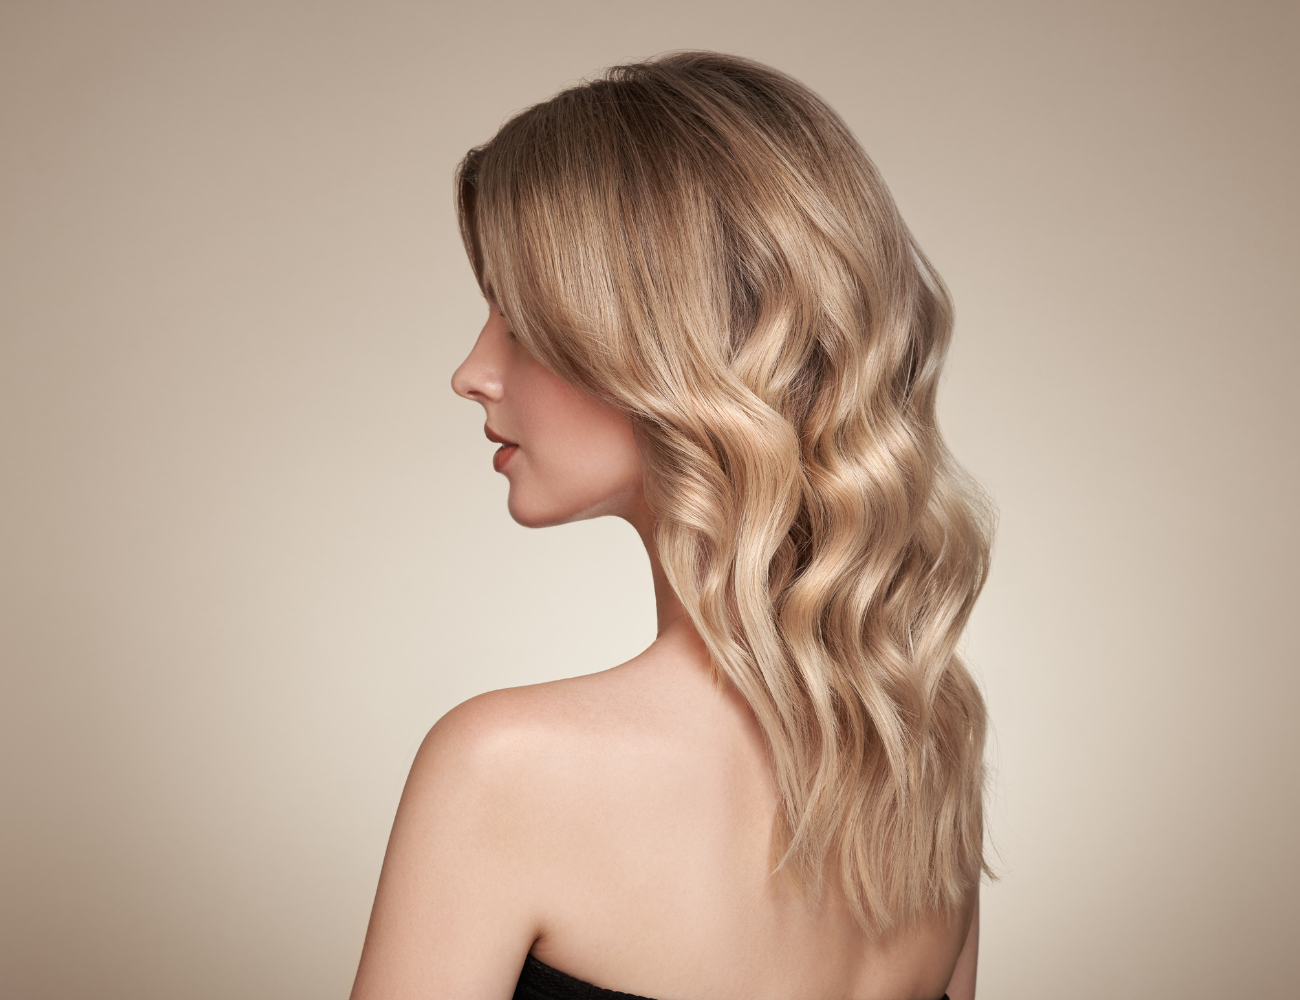 How Often Should You Use Blonde Shampoo?